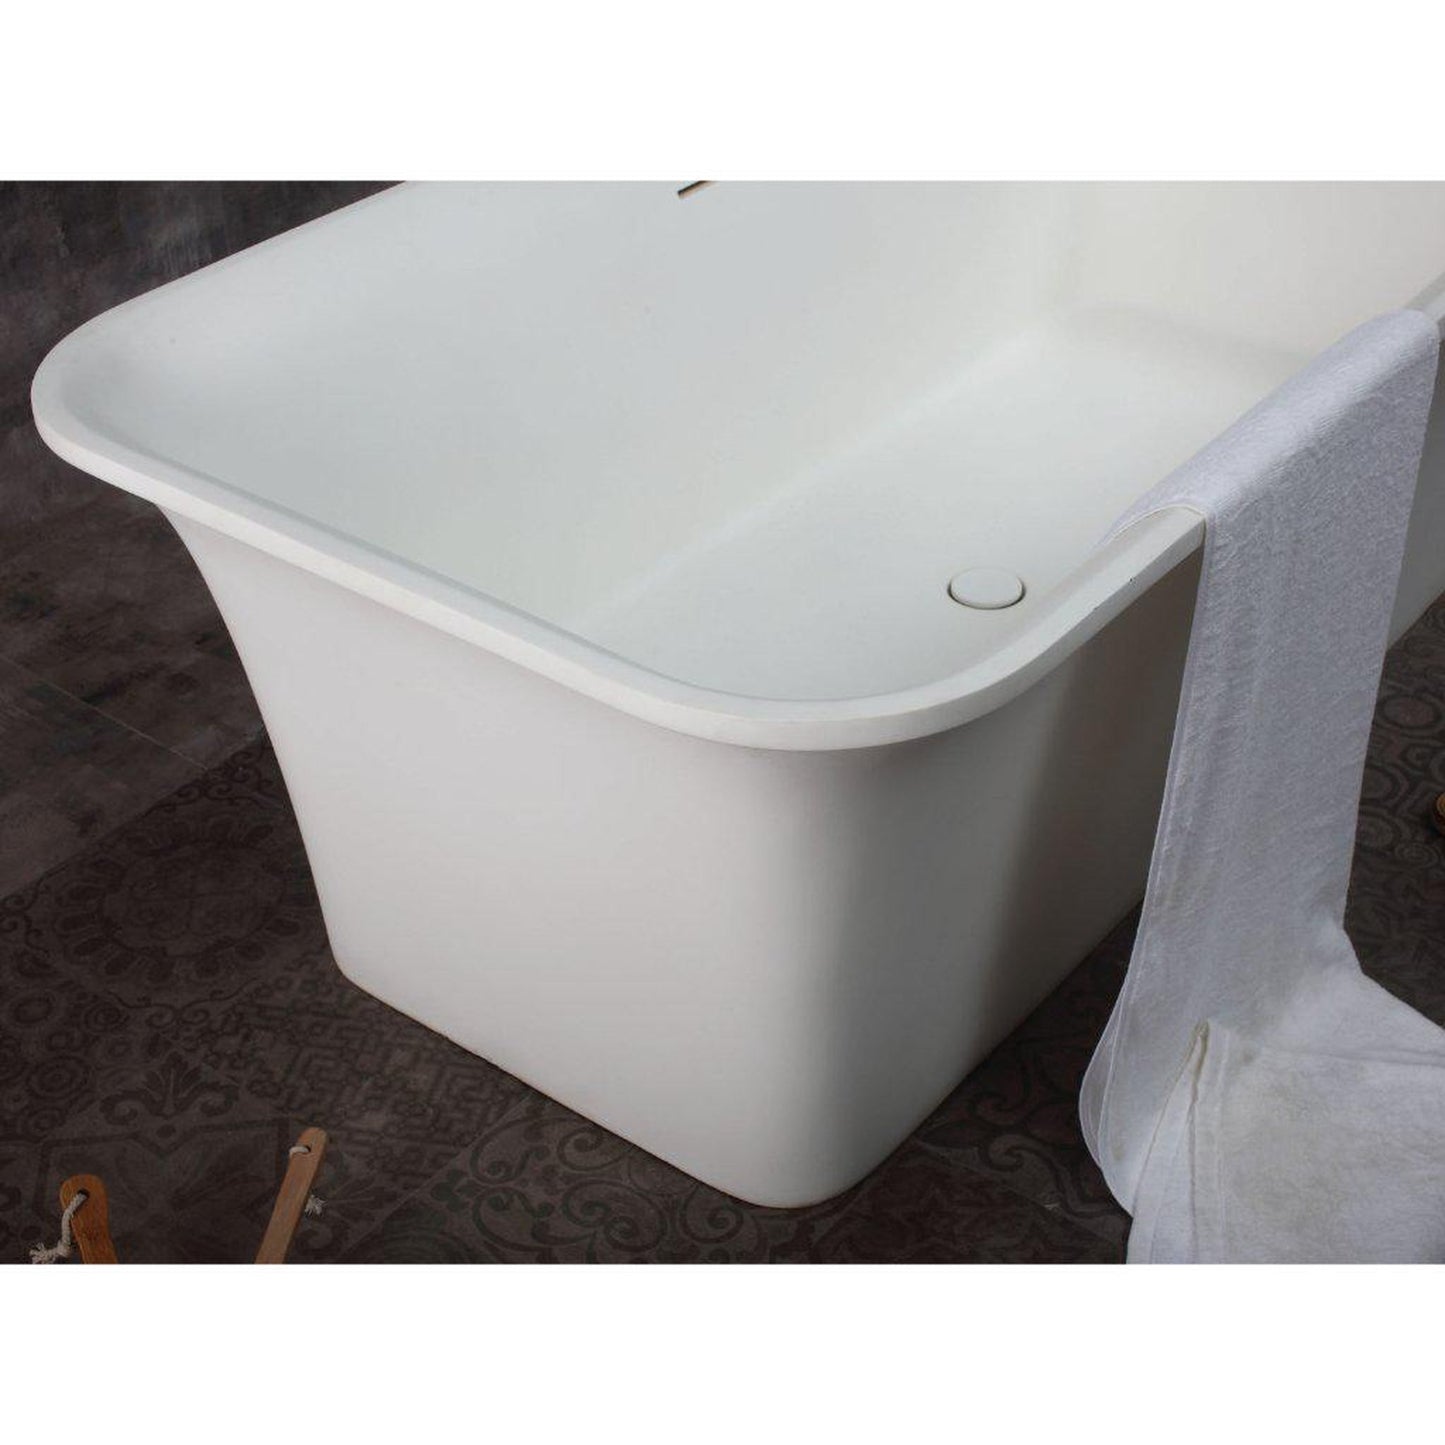 ALFI Brand AB9942 67" One Person Freestanding White Rectangle Solid Surface Smooth Resin Soaking Bathtub